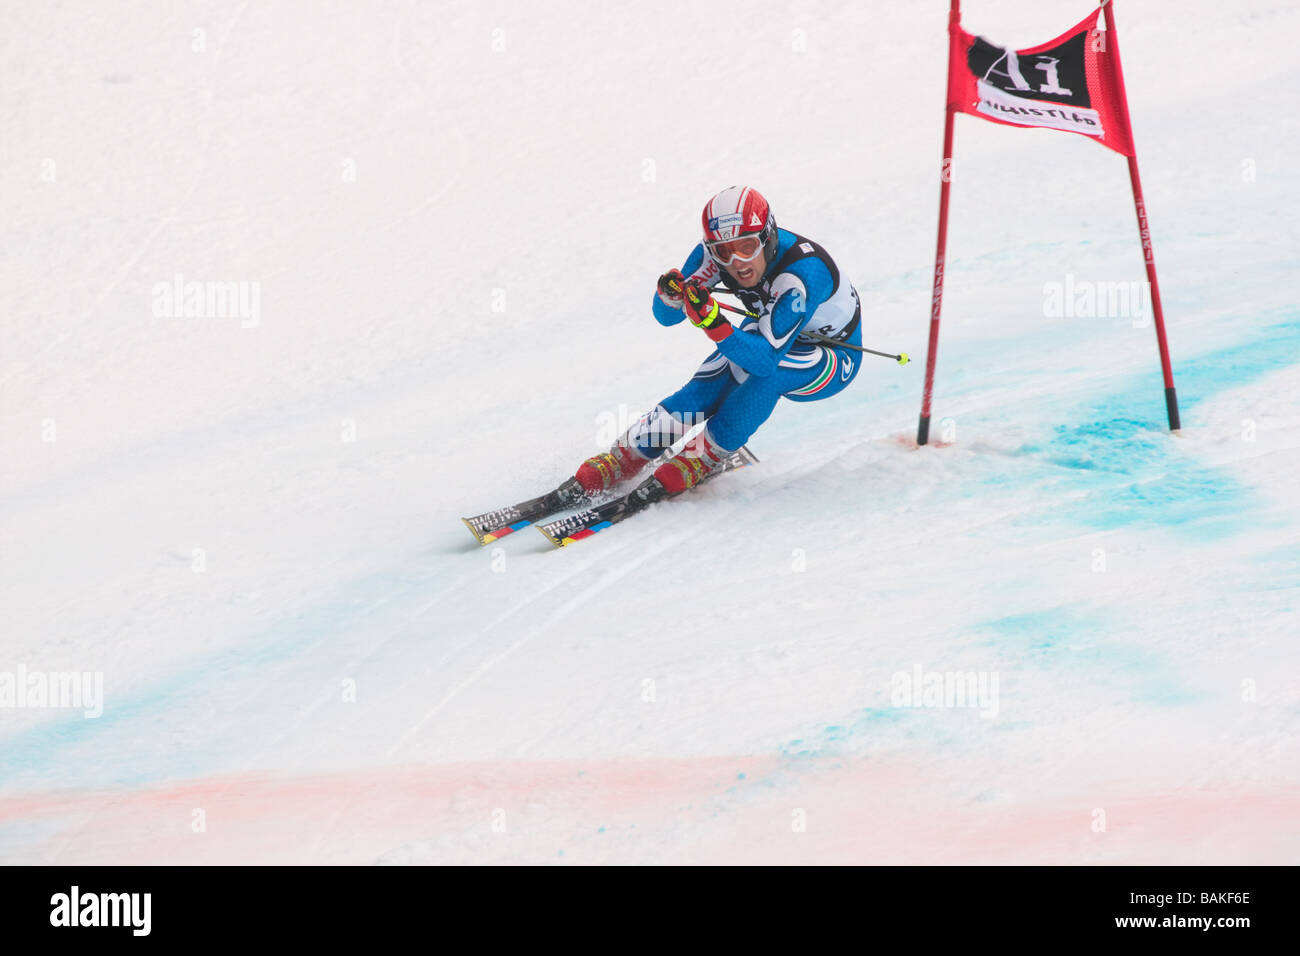 Italian Ski team member Manfred Moelgg competes in the FIS World Cup Giant Slalom at Whistler Stock Photo